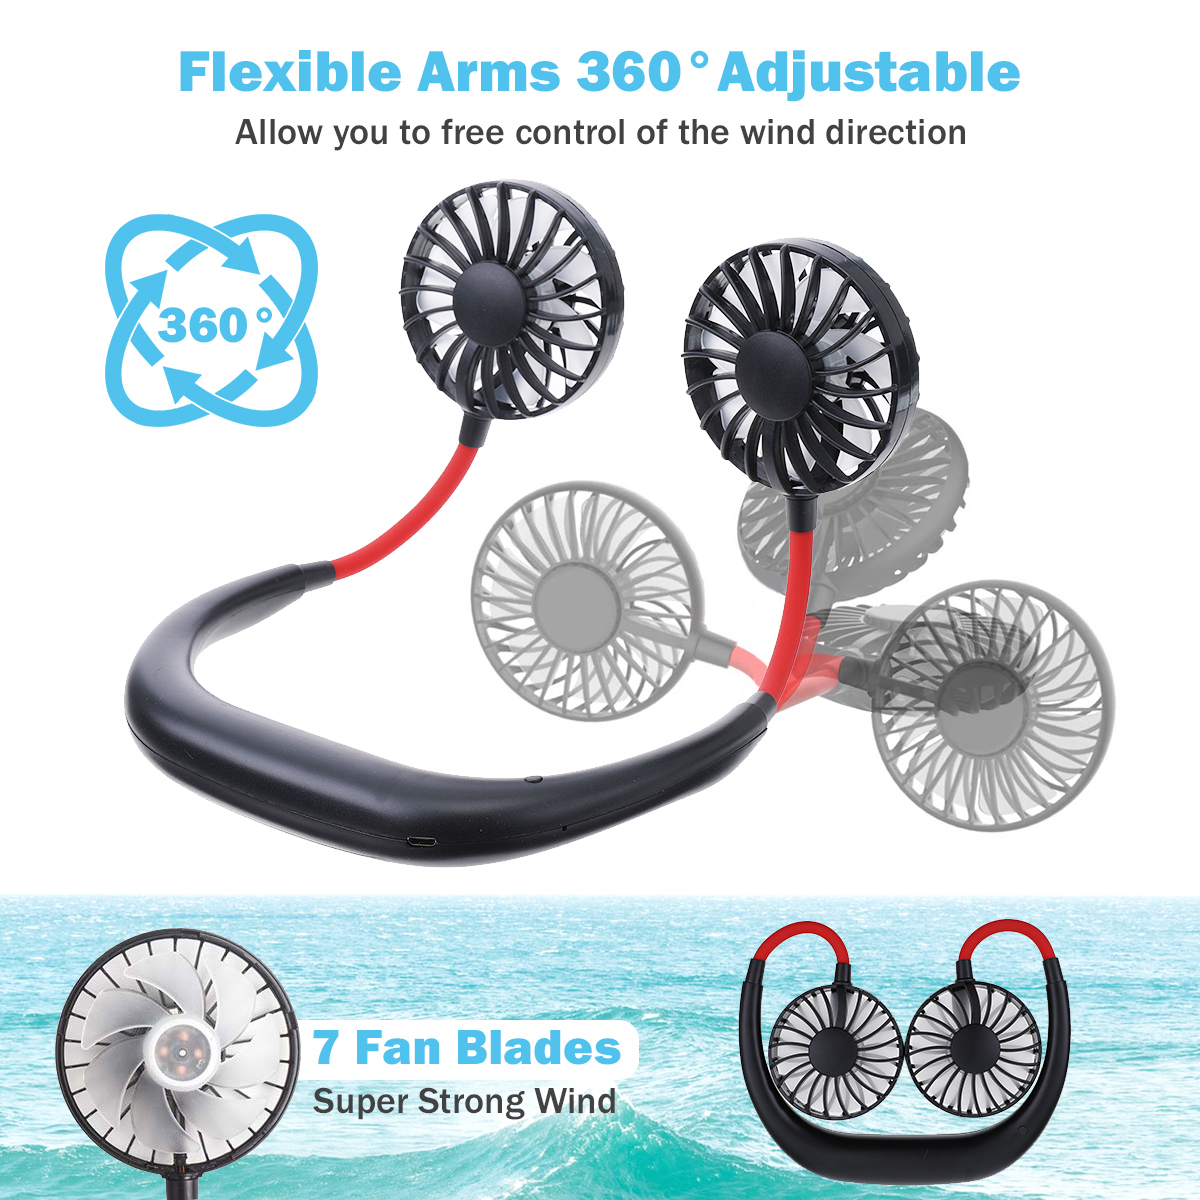 Portable-Mini-Fan-Neckband-Lazy-Neck-Hanging-Style-Cooling-Air-USB-Rechargeable-1942333-4